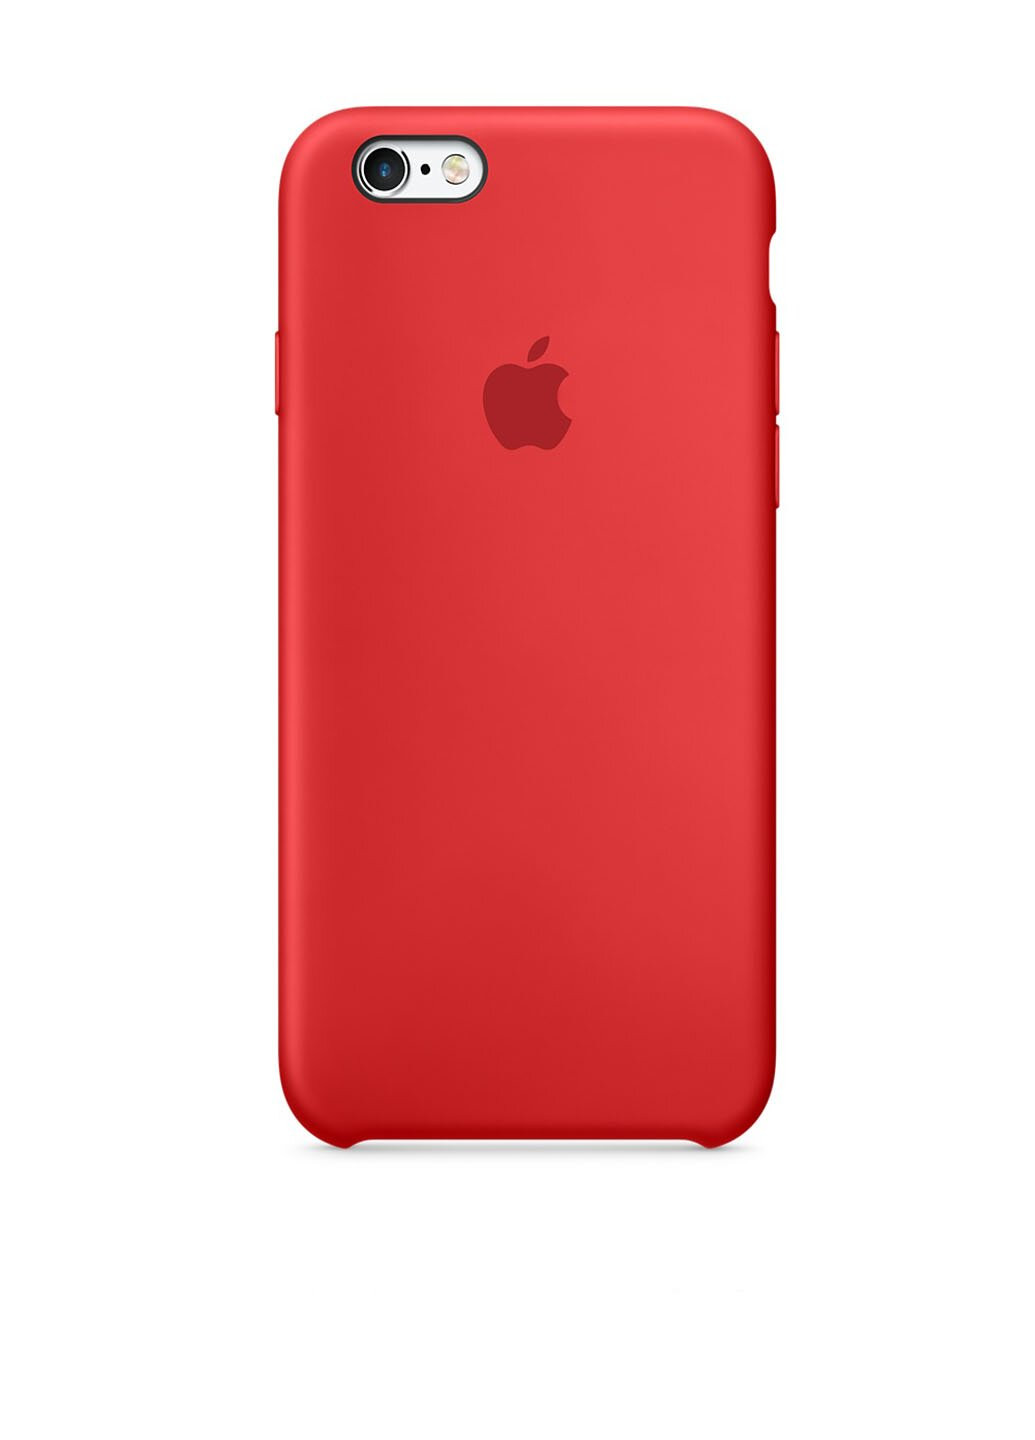 Чохол Silicone Case для iPhone SE / 5s / 5 product red ARM (110130326)